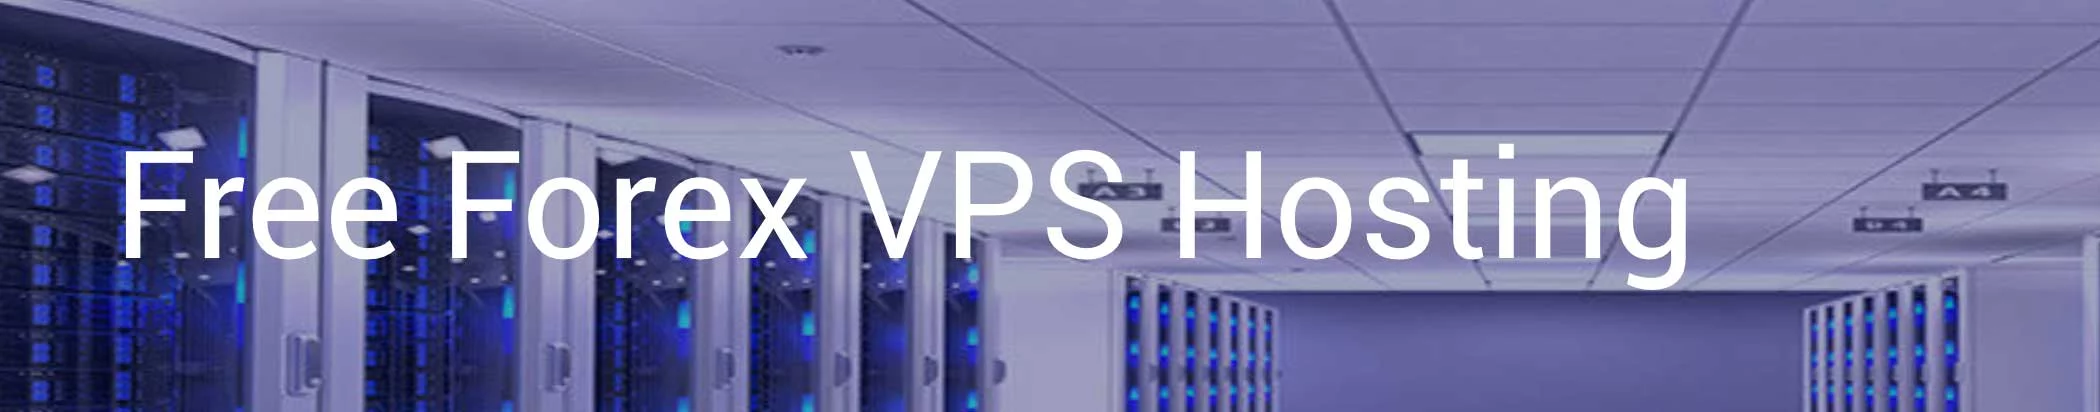 formax Free VPS